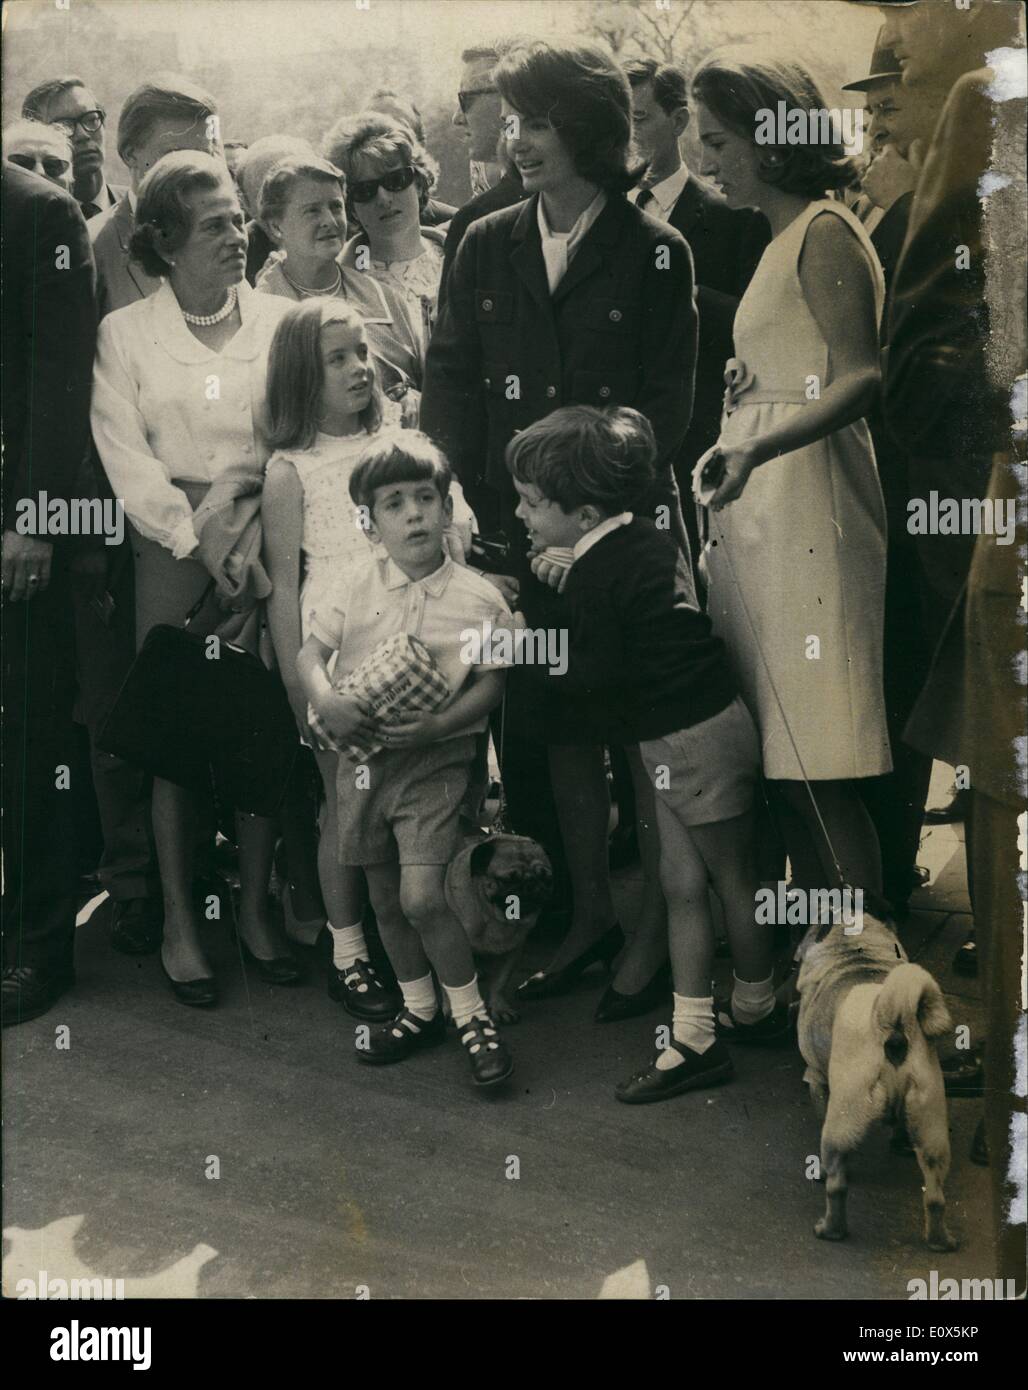 May 05, 1965 - Jackie Kennedy and her sister go to Buckingham Palace with their children: Mrs. Jacqueline Kennedy and her two children John, 5 and Caroline, 7, accompanied by her sister, Princess Radziwill, and her two children, walked from the Radziwill home in Buckingham place, through the park to Buckingham Palace today. They were invited inside to watch the ceremonial changing of the guard. Photo Shows Jackie Kennedy (dark coat) and her two children, Caroline and John (holding a loaf of bread) pictured with Princess Radziwill and her son Anthony outside the Palace today. Stock Photo